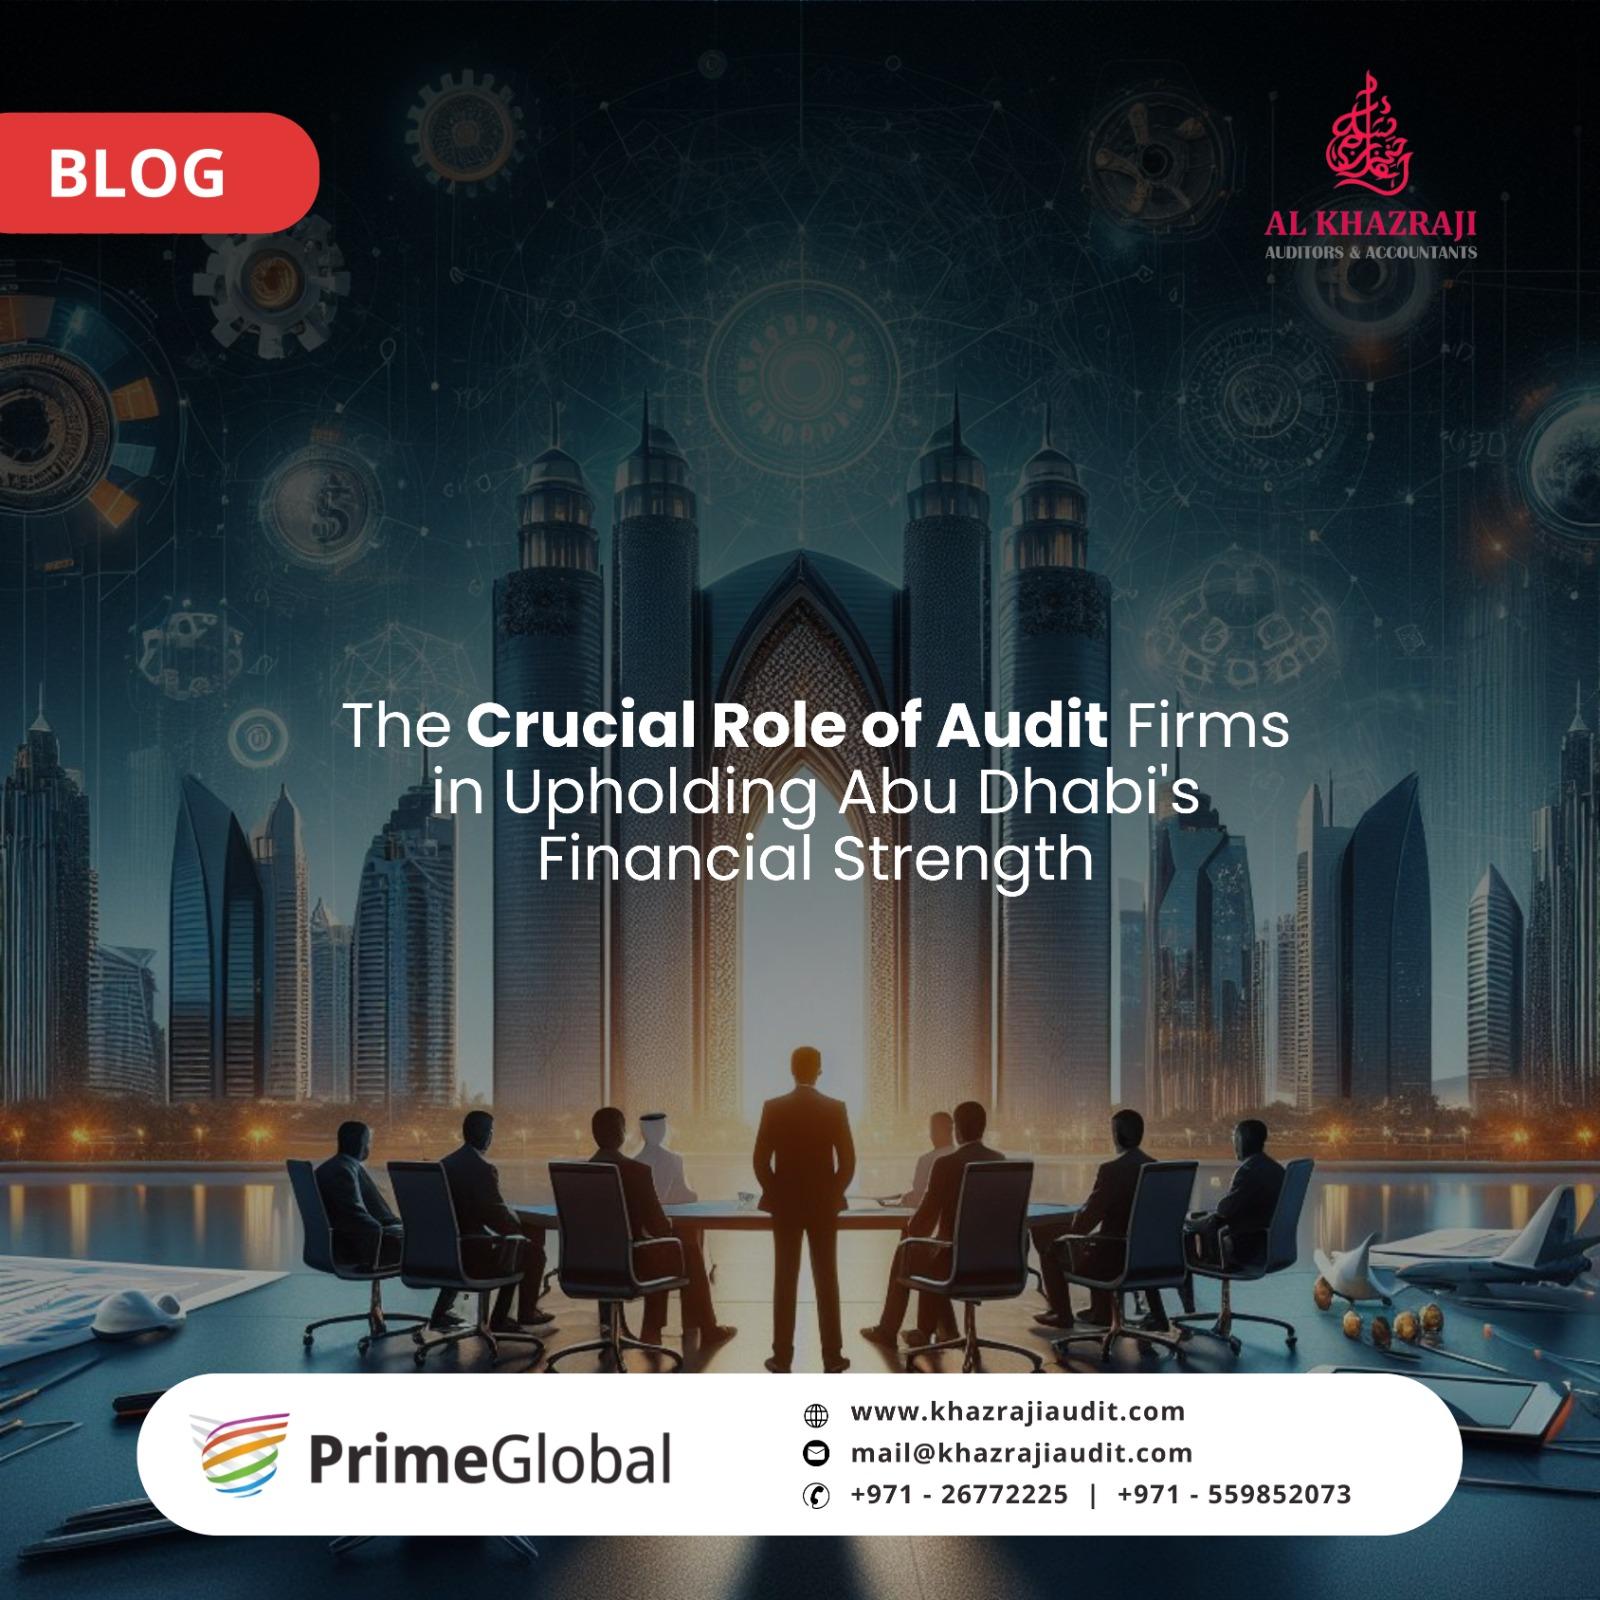 The Crucial Role of Audit Firms in Upholding Abu Dhabi’s Financial Strength